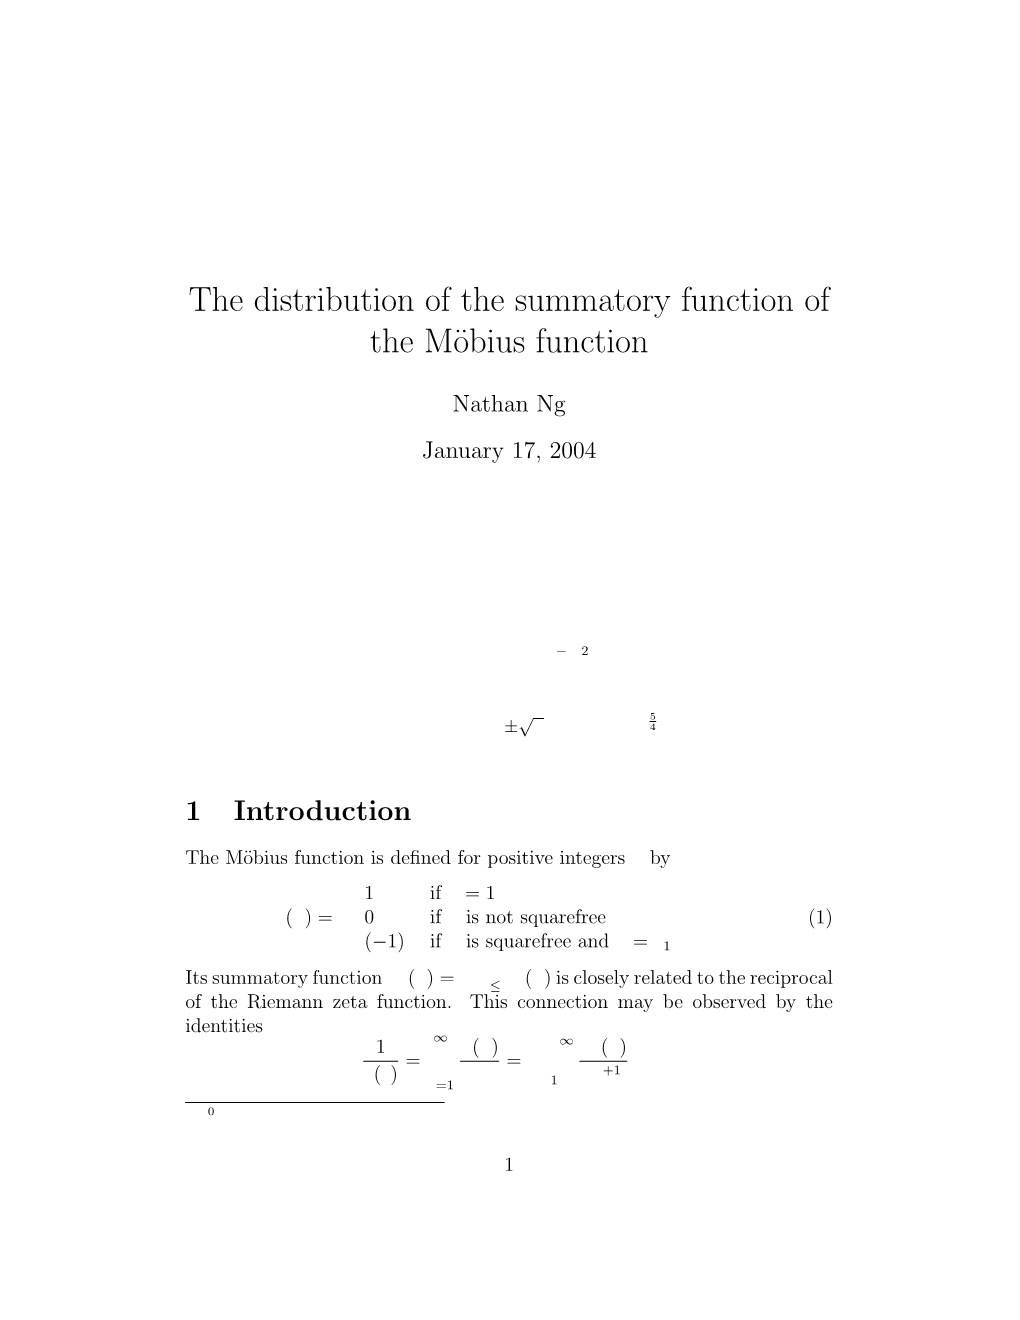 The Distribution of the Summatory Function of the Möbius Function